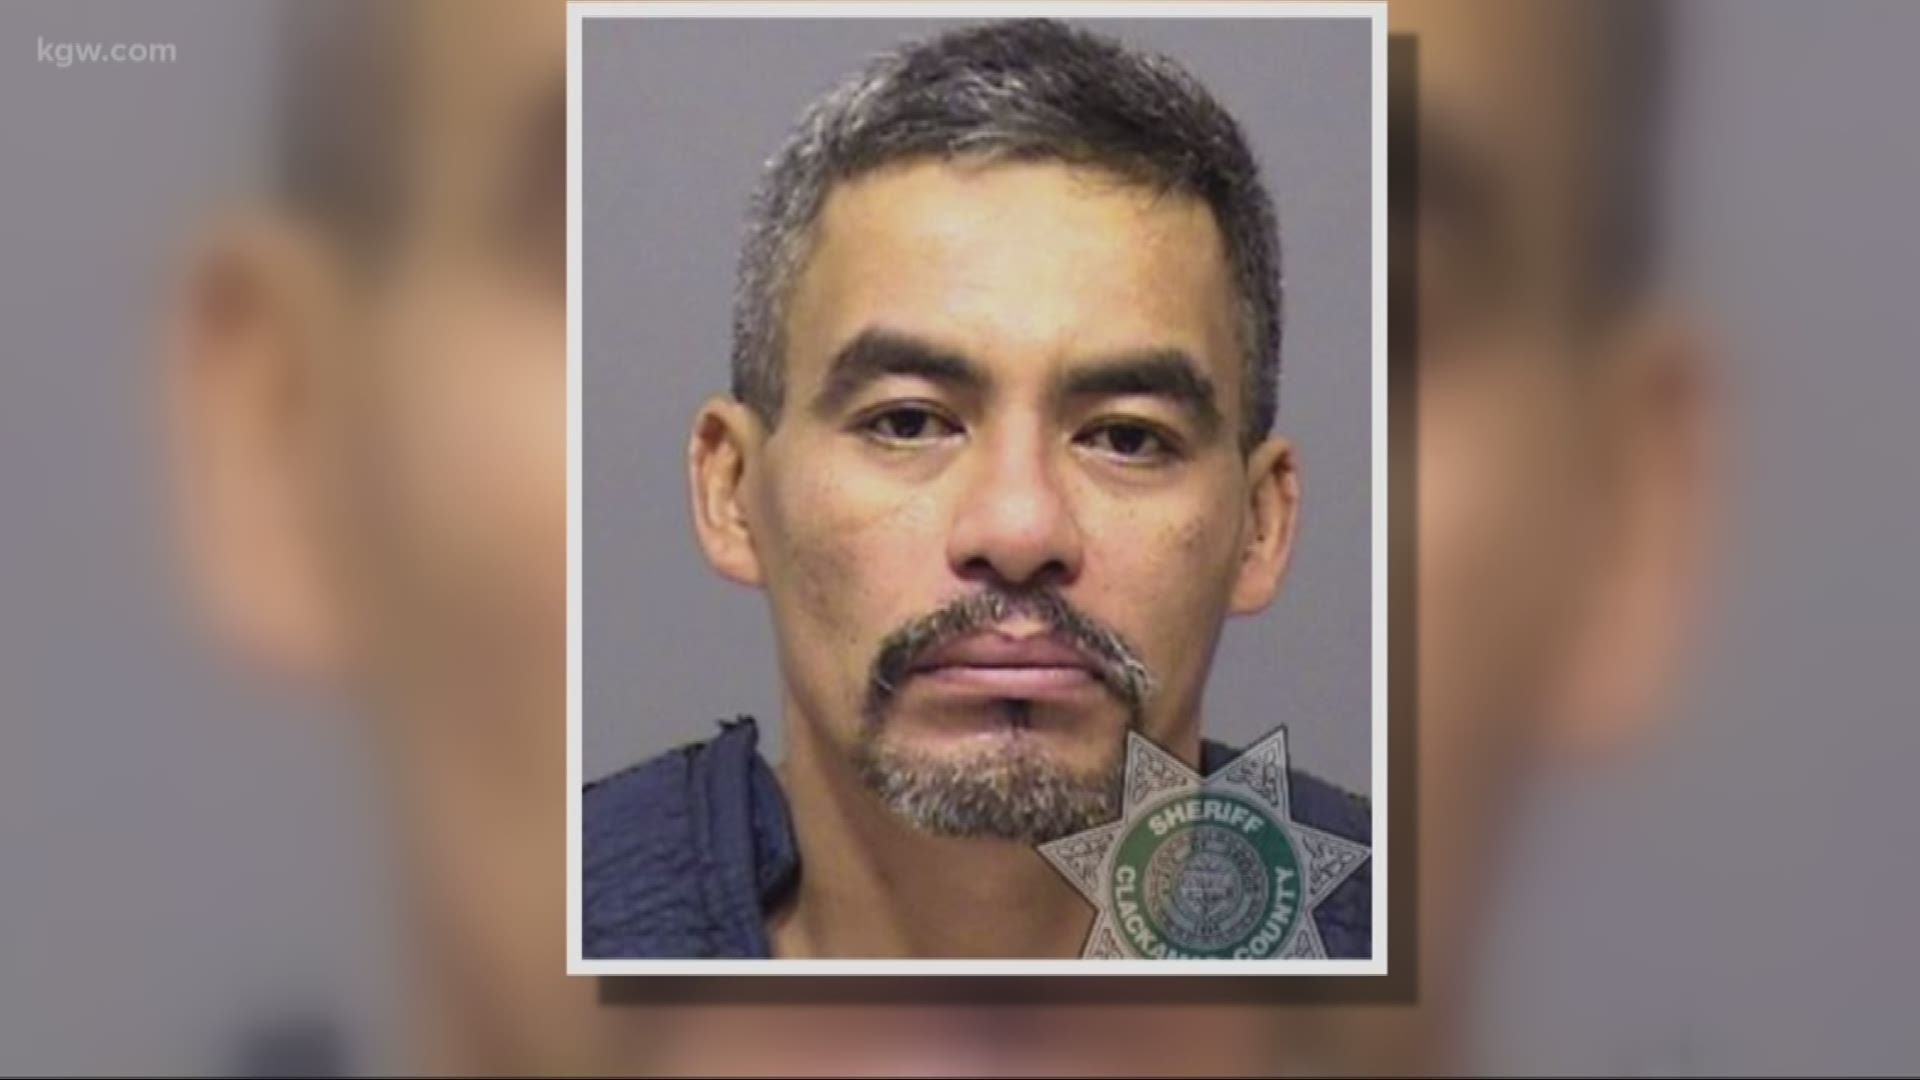 ICE and Multnomah County are blaming each other after a man was accused of killing his wife.